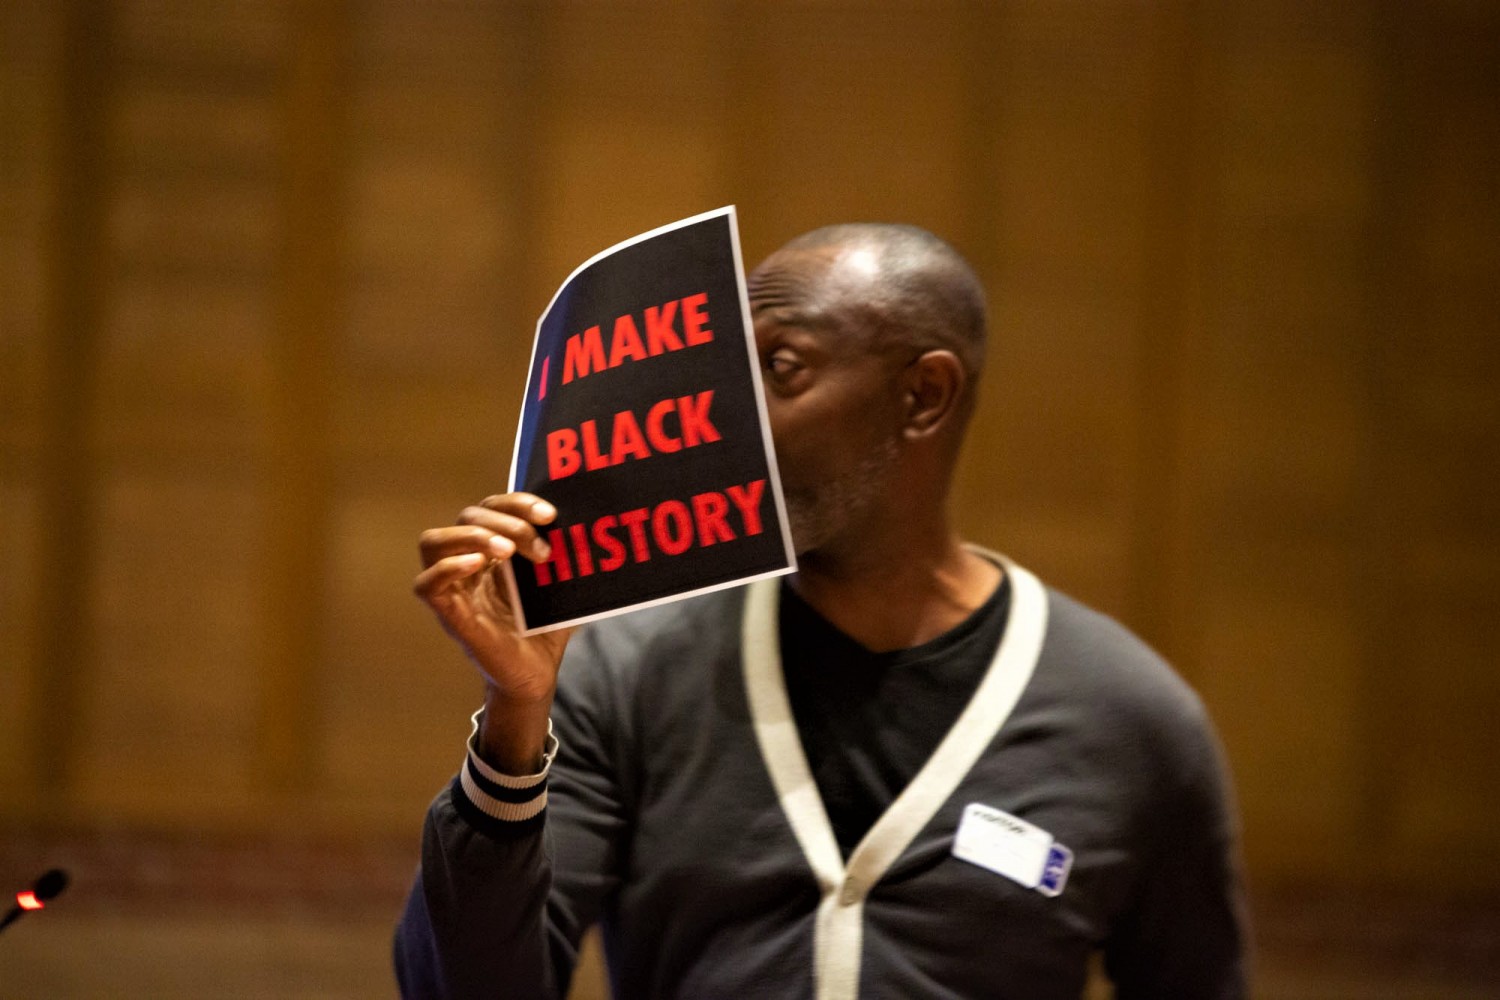 Probe of anti-Black racism in the PDSB could cap off historic month with meaningful reform